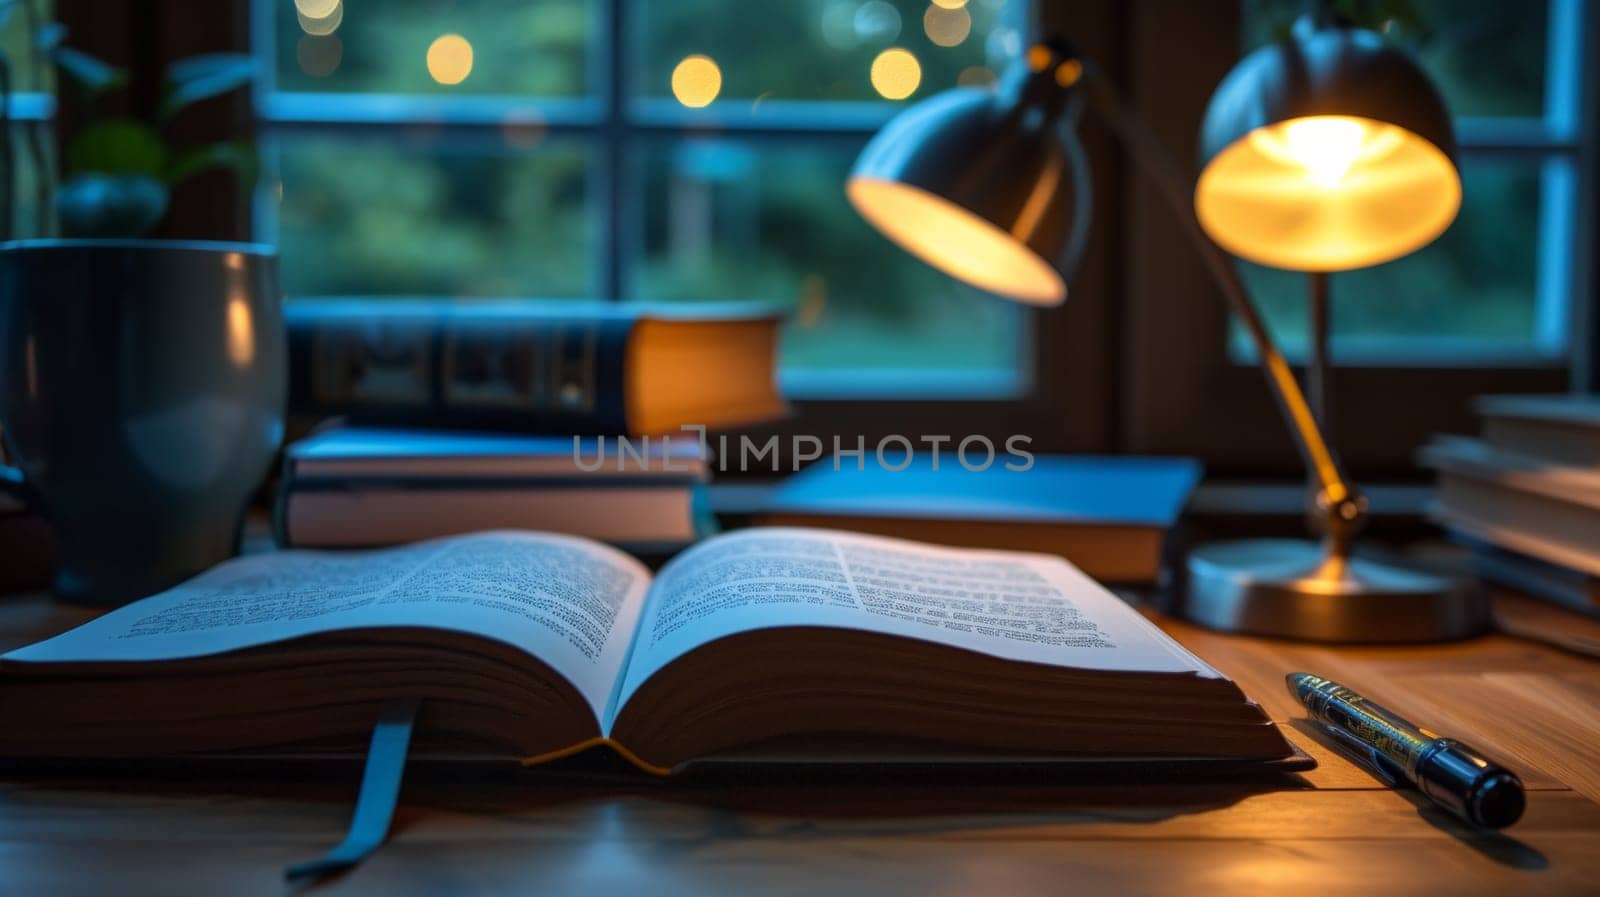 A book open on a table with two lamps and other items